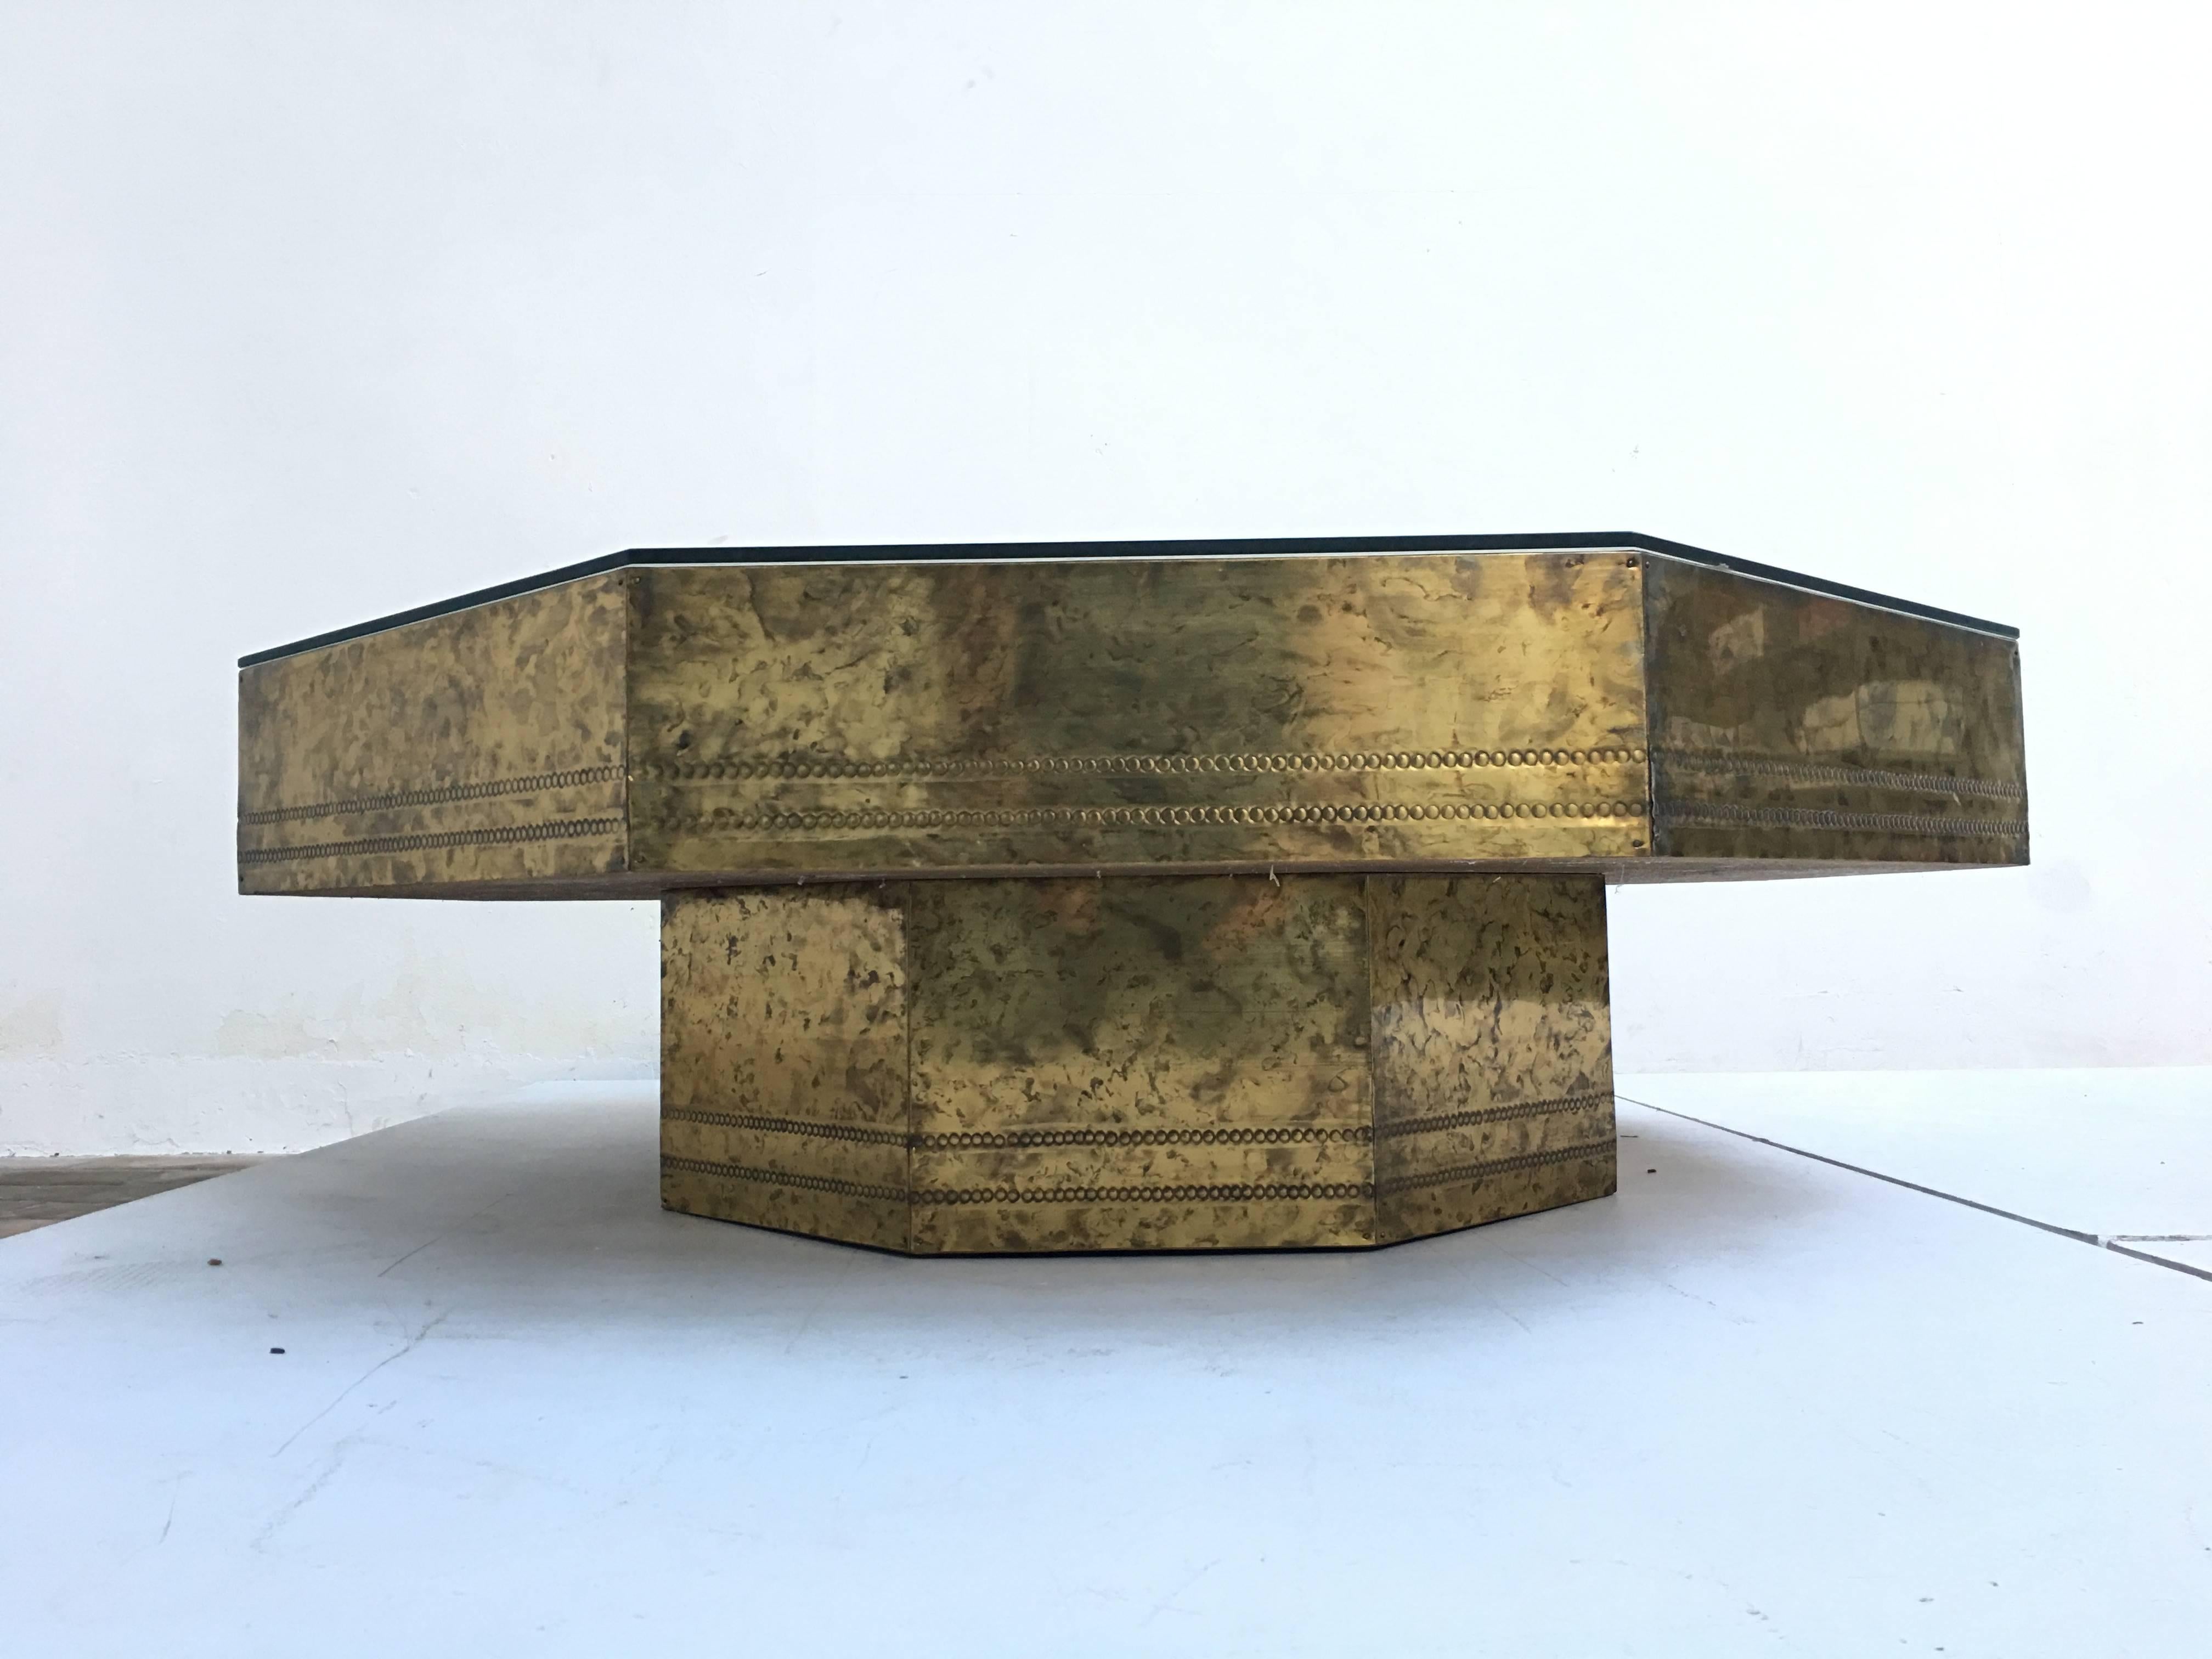 Beautiful 1970s acid etched brass coffee table in a highly attractive octagon form by sculptor Bernard Rohne for 'Mastercraft', U.S.A.

This artisan crafted table features a beautiful mix of solid brass inlays combined with acid etched brass